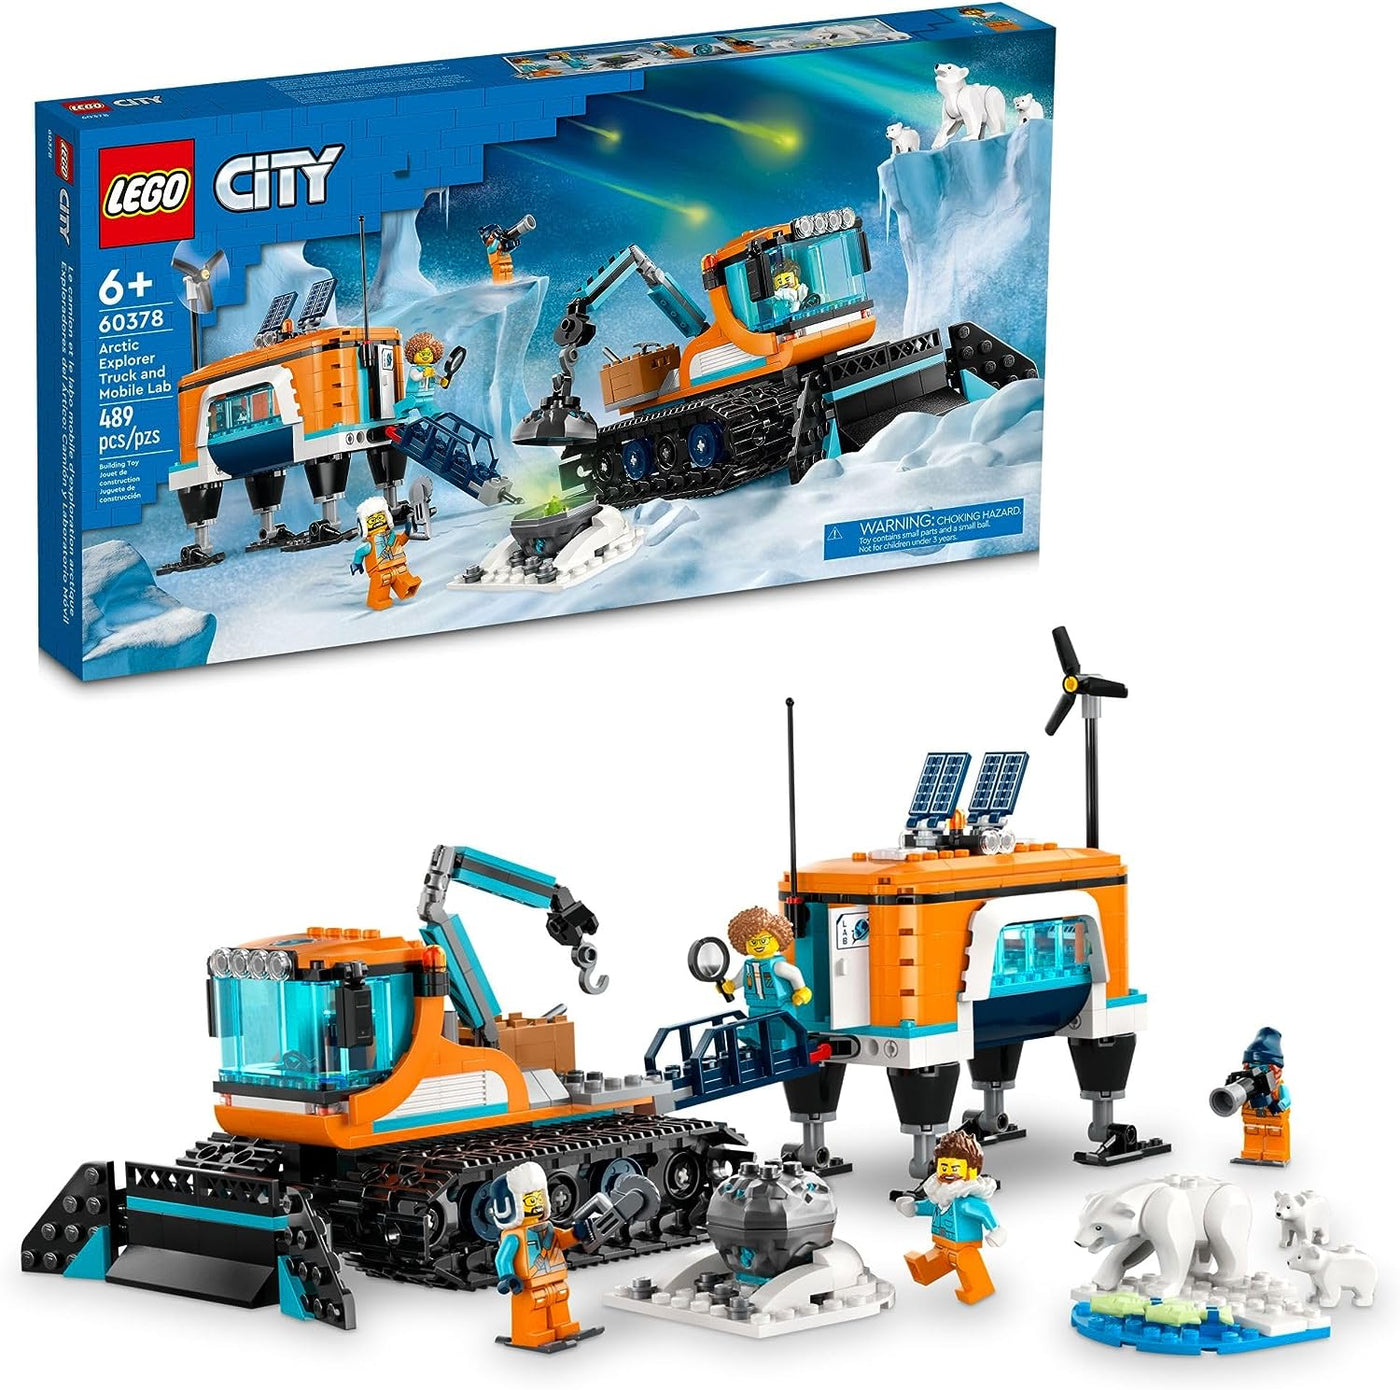 LEGO City Arctic Explorer Truck and Mobile Lab 60378 Building Toy Set for Ages 6+ - $45